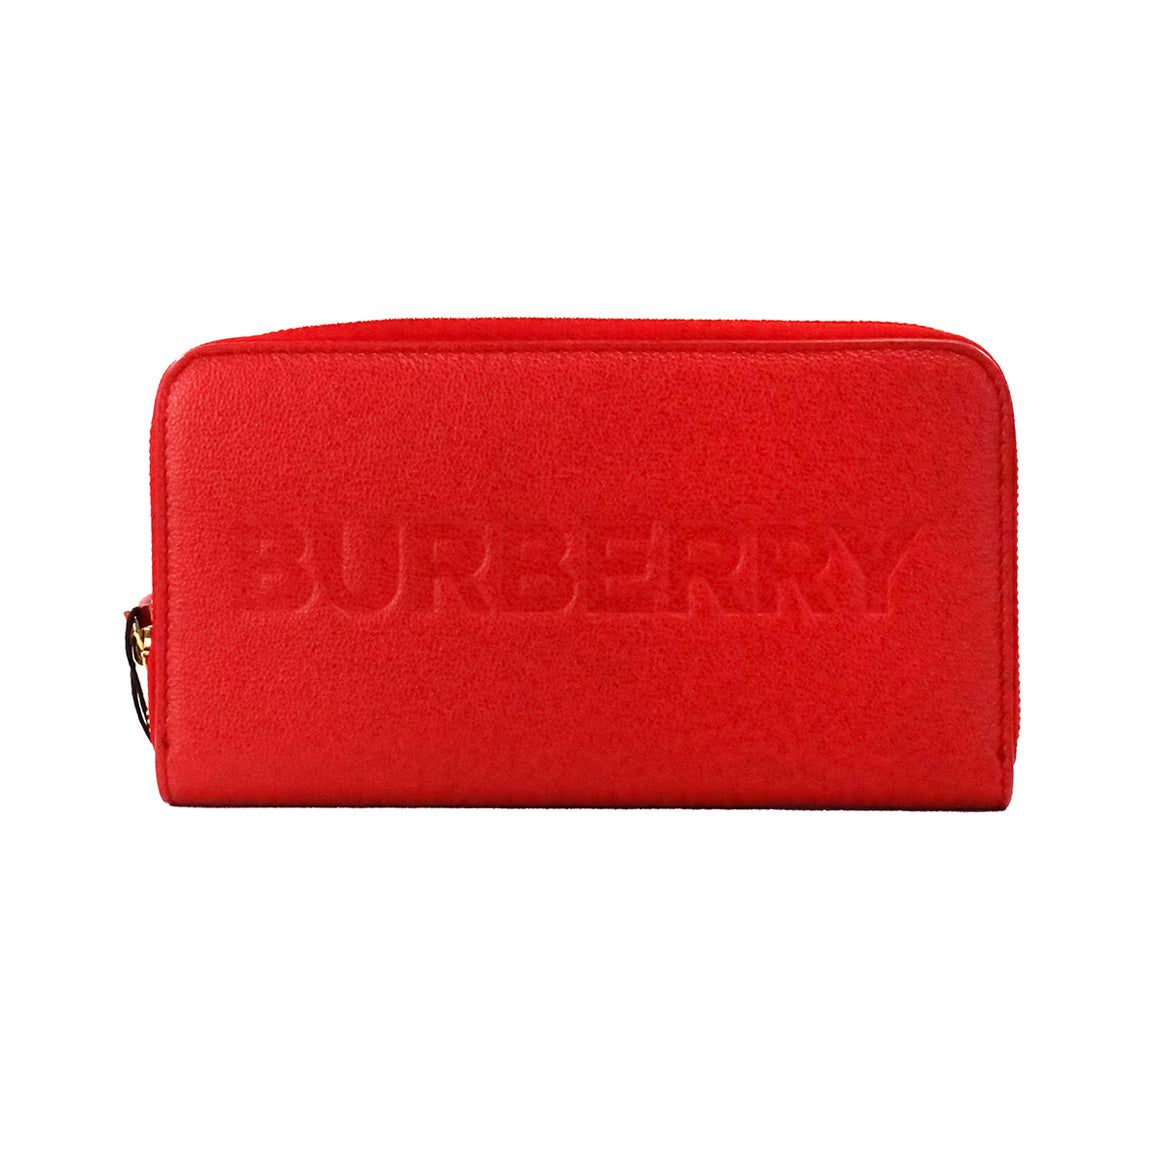 Burberry Elmore Red Branded Embossed Leather Continental Clutch Wallet